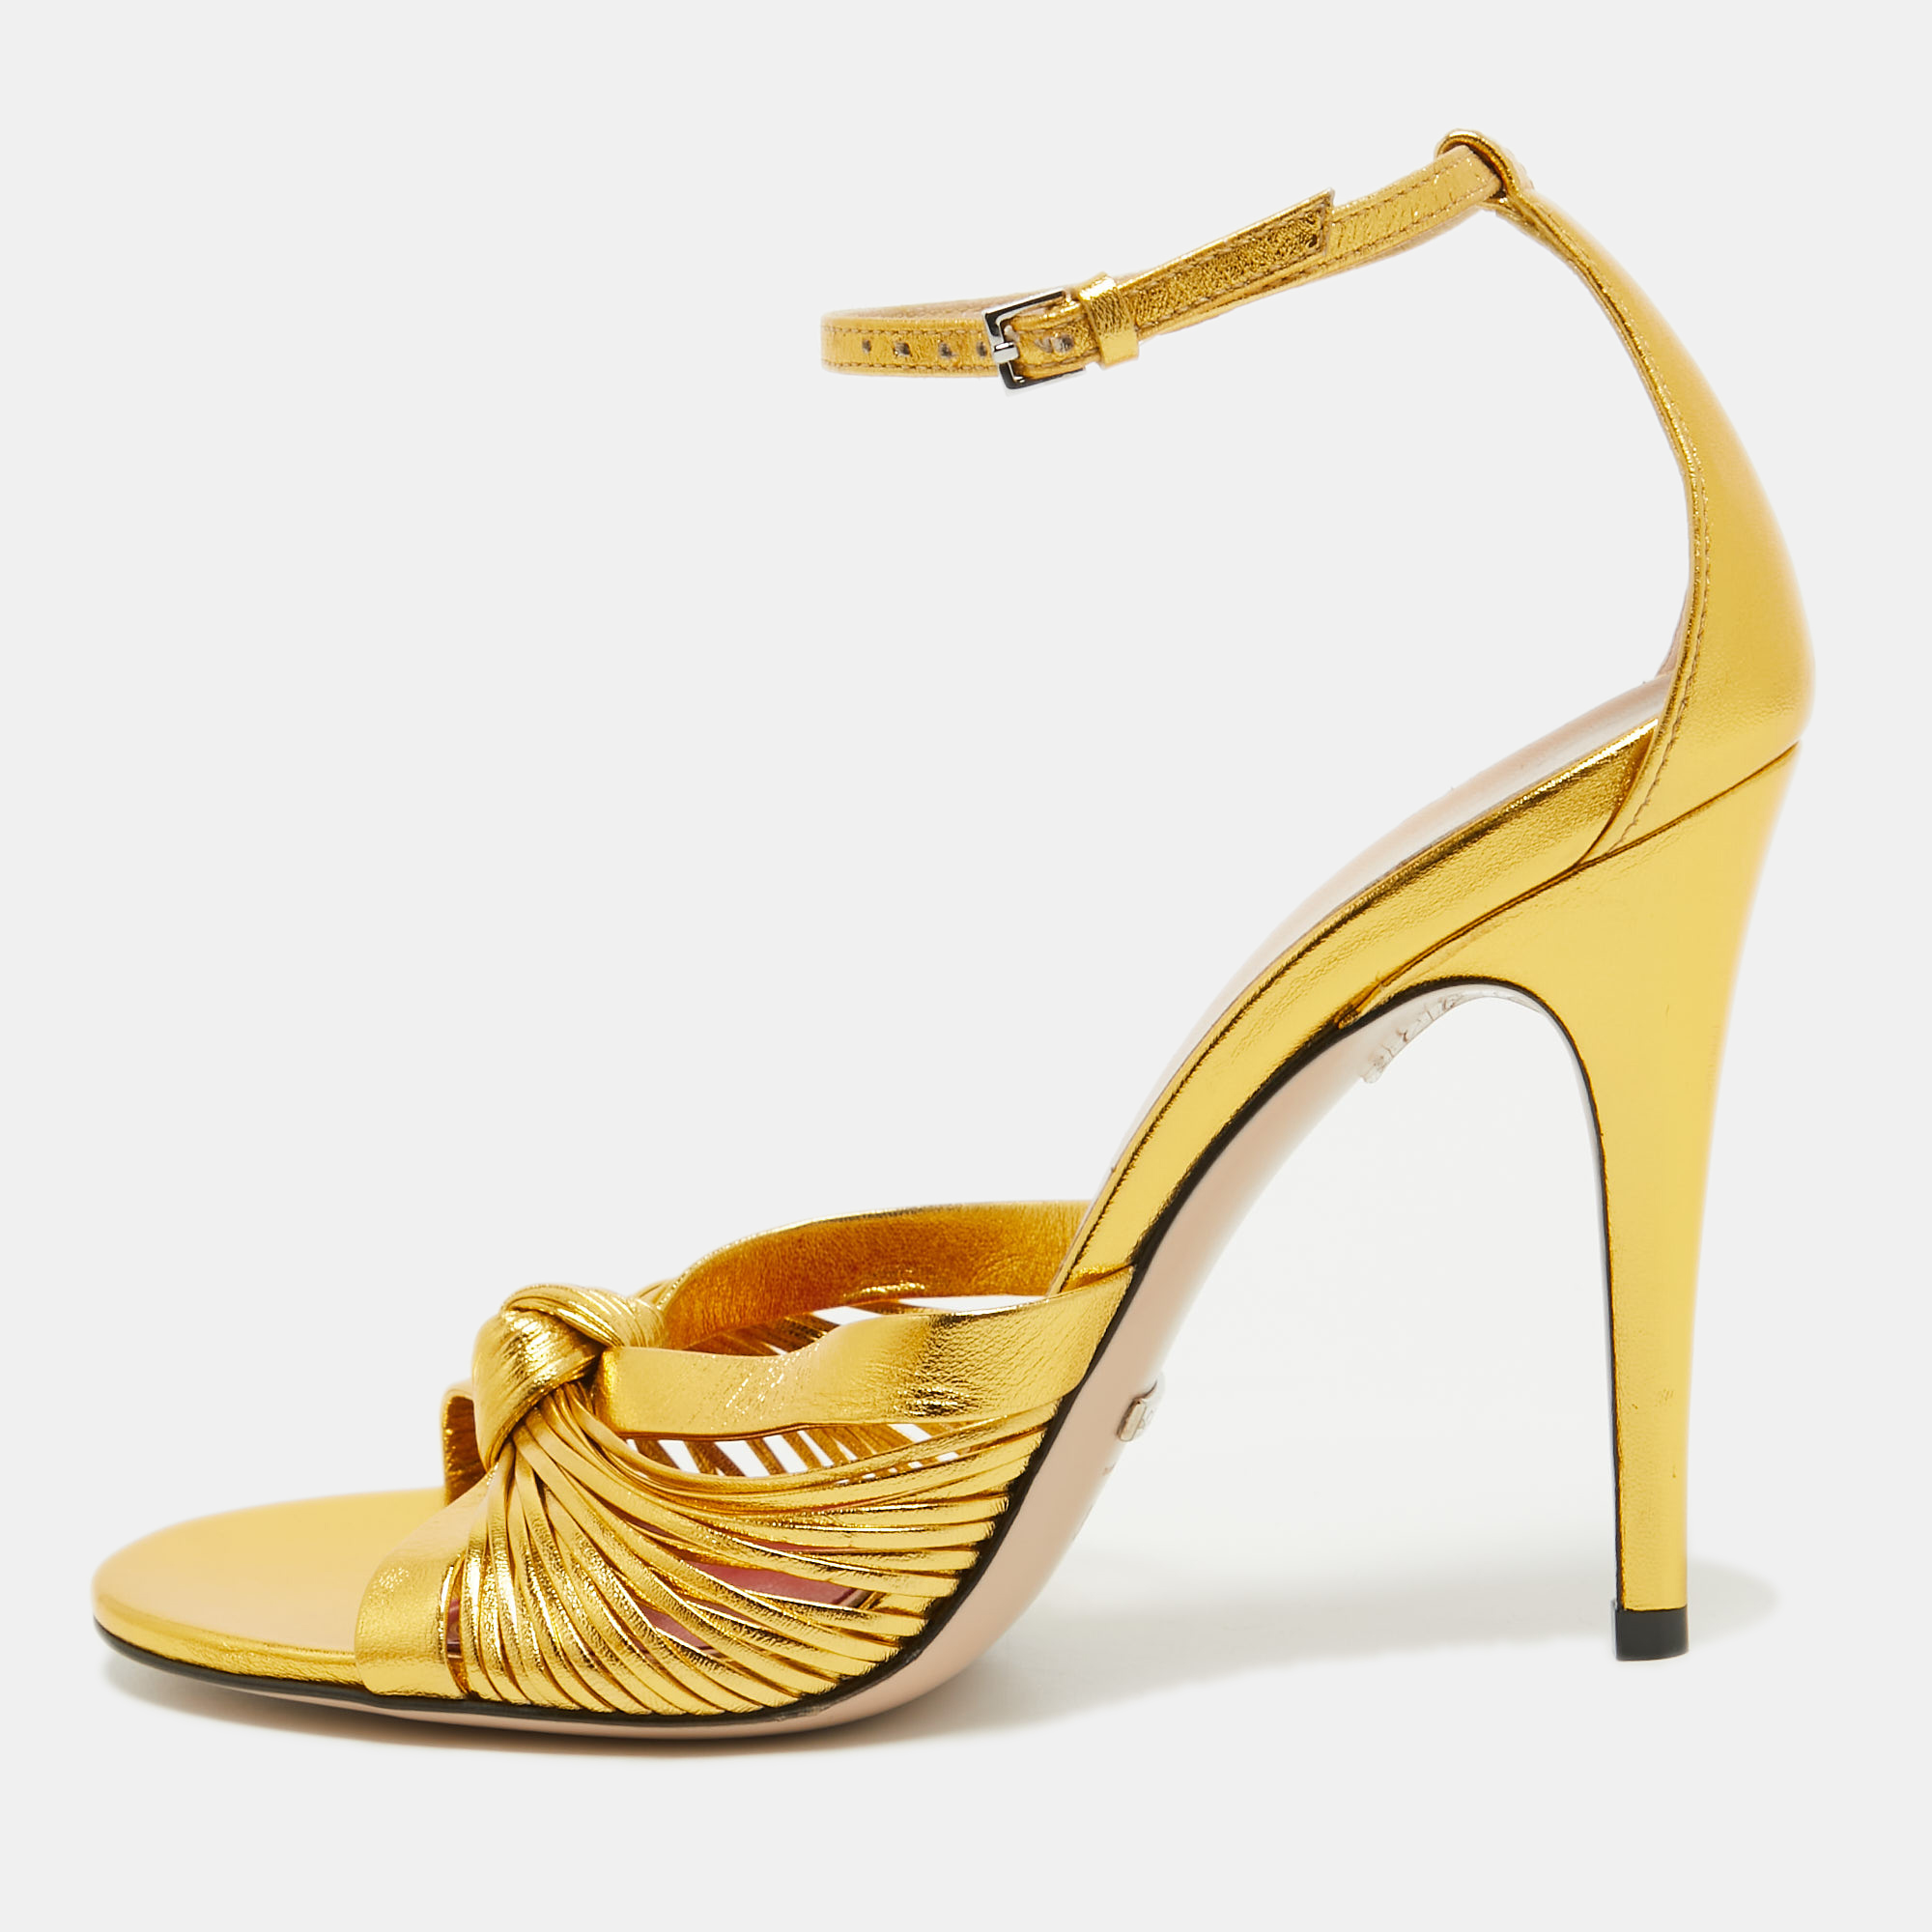 Pre-owned Gucci Metallic Gold Leather Allie Ankle Strap Sandals Size 38.5